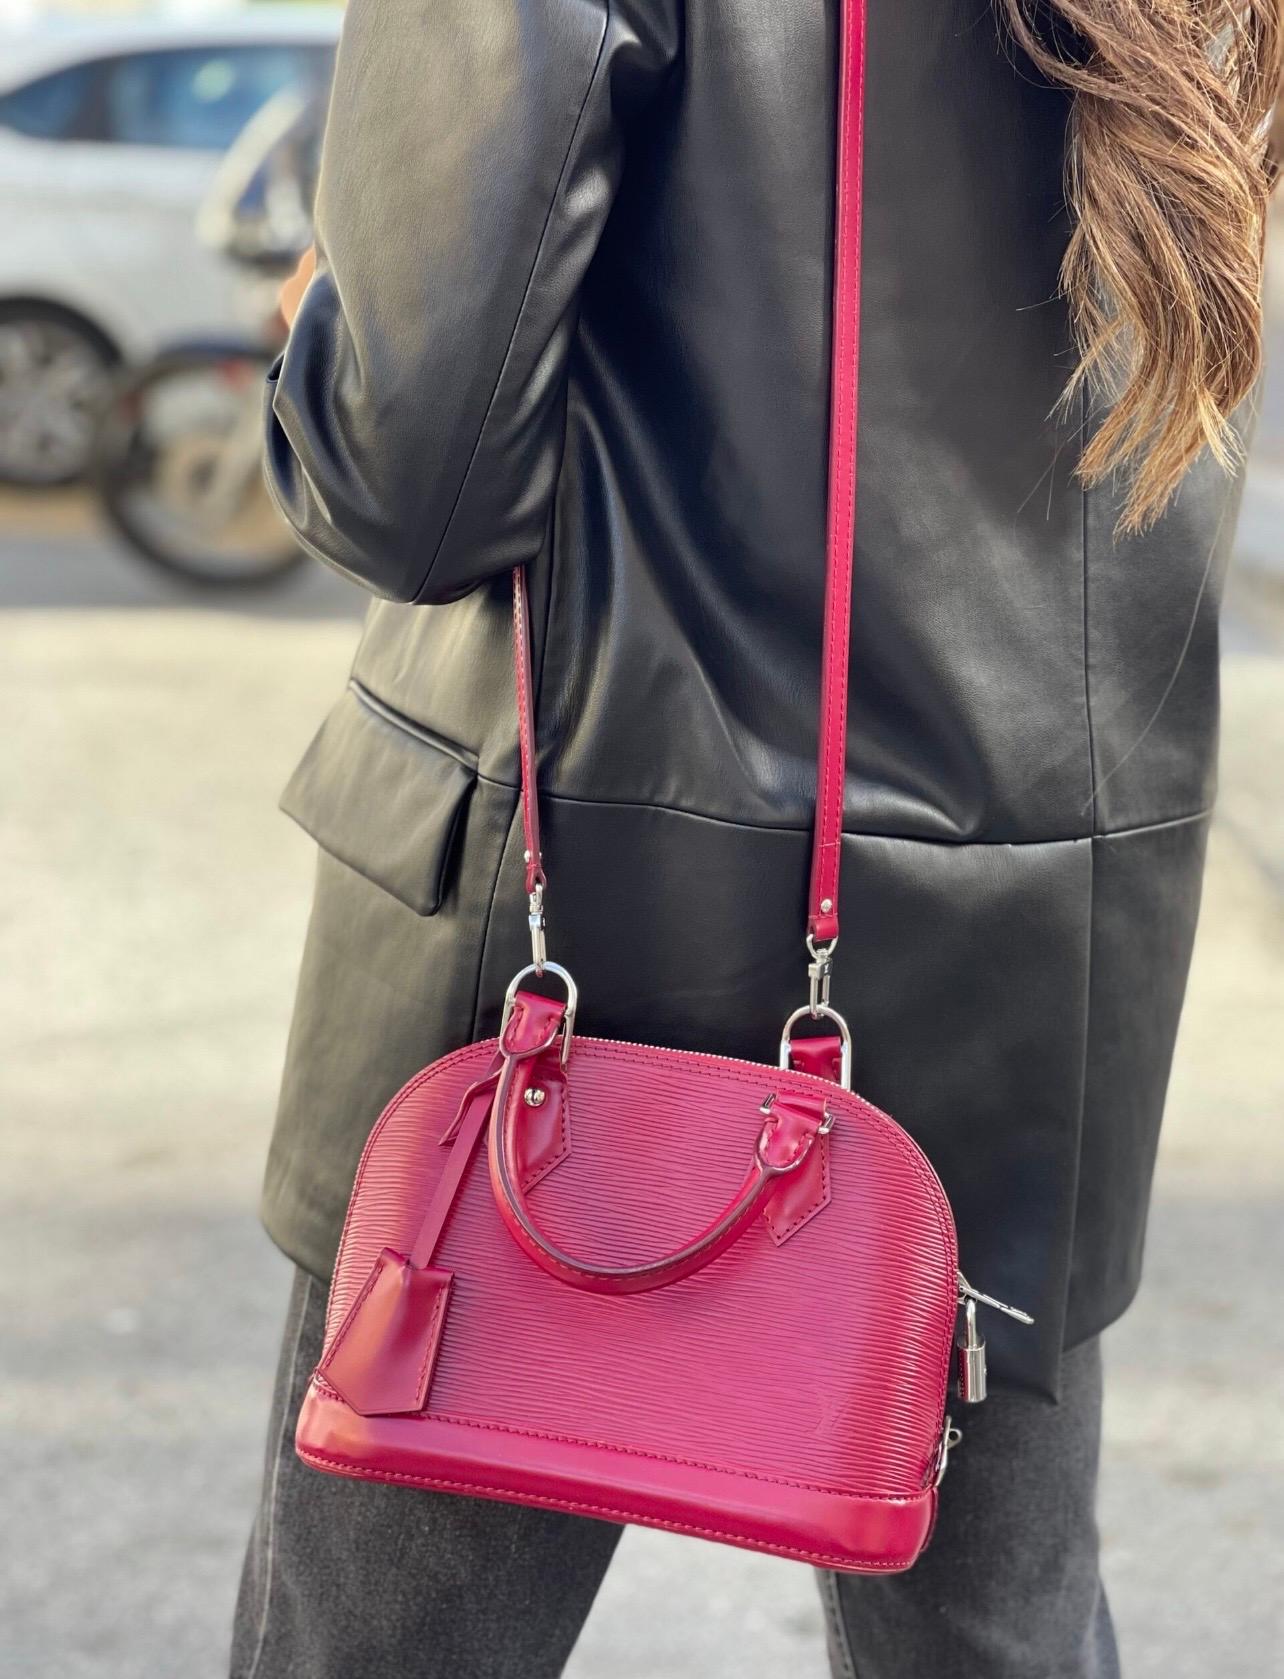 Louis Vuitton Alma BB handbag in Epi leather with silver hardware.  It also features a removable leather shoulder strap.  Central opening with zip and padlock closure with keys.  Interior in burgundy suede with a side pocket.  Condition of the bag